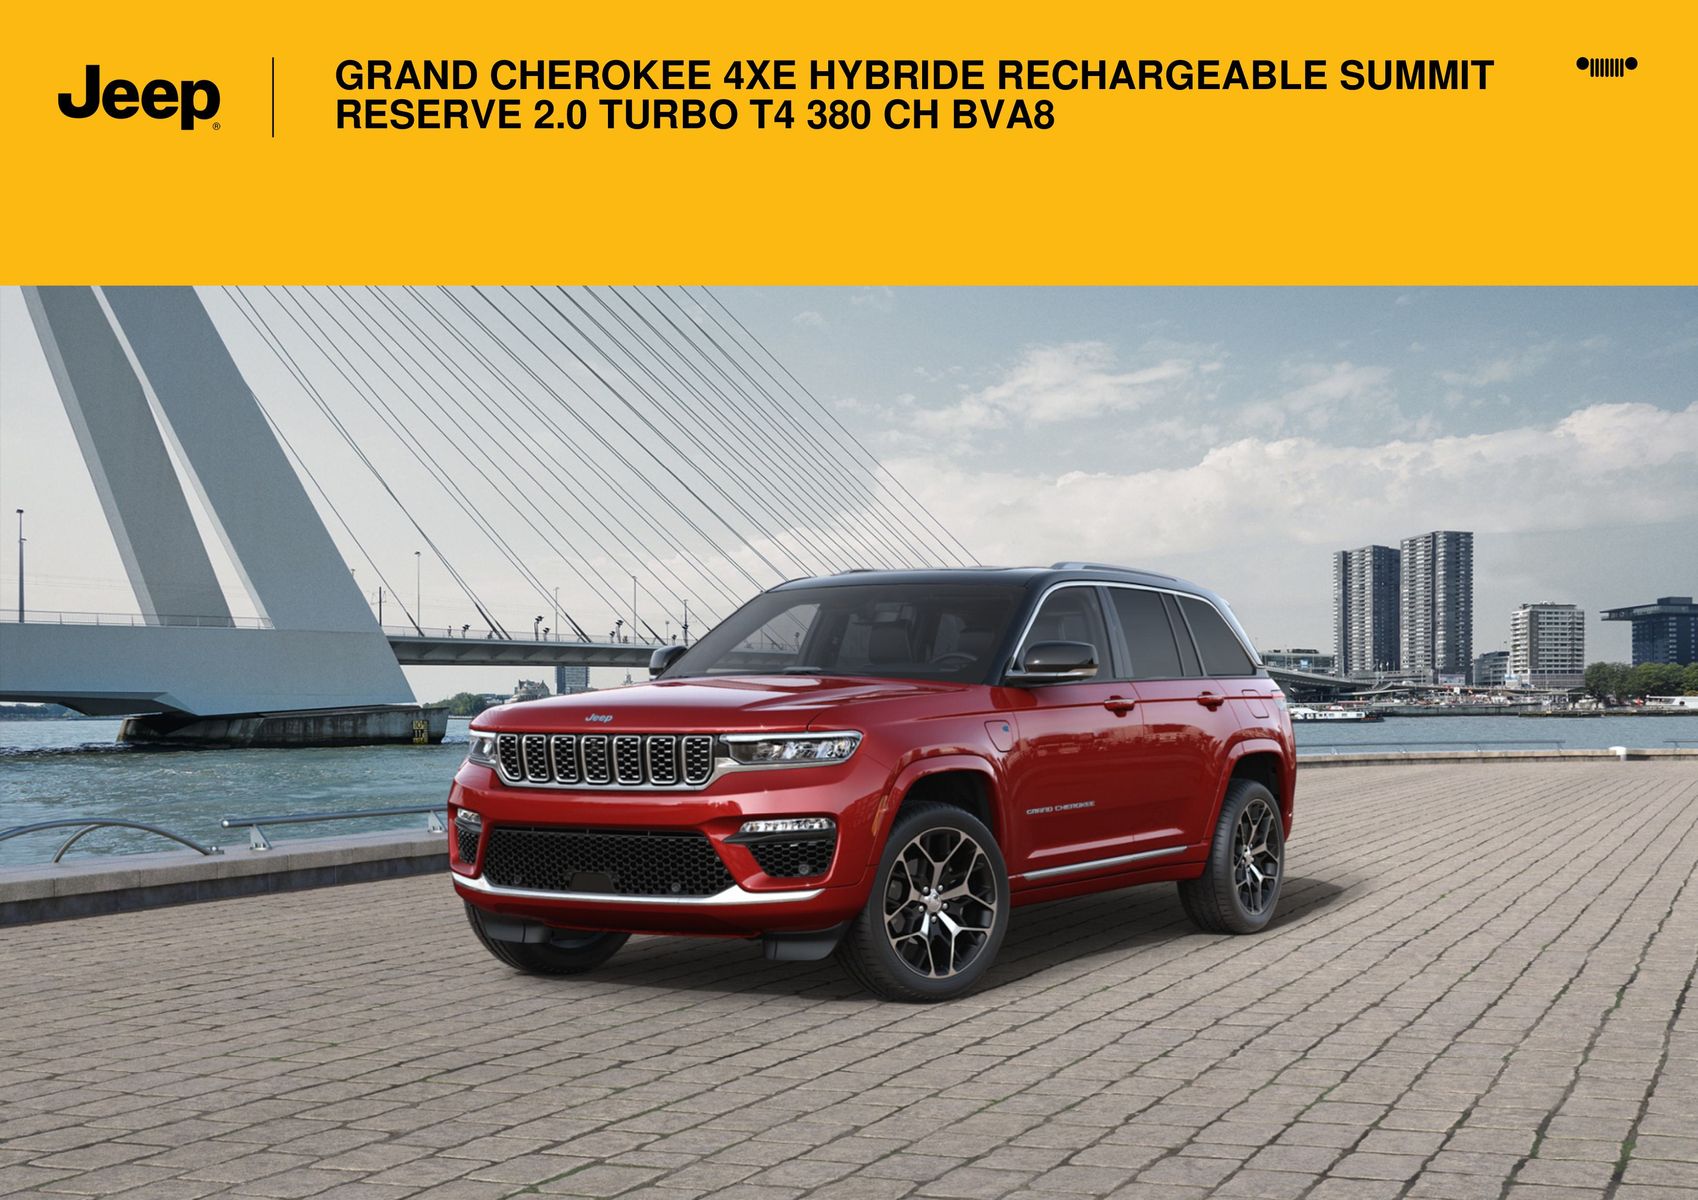 Catalogue GRAND CHEROKEE 4XE HYBRIDE RECHARGEABLE SUMMIT RESERVE 2.0 TURBO T4 380 CH BVA8:, page 00001